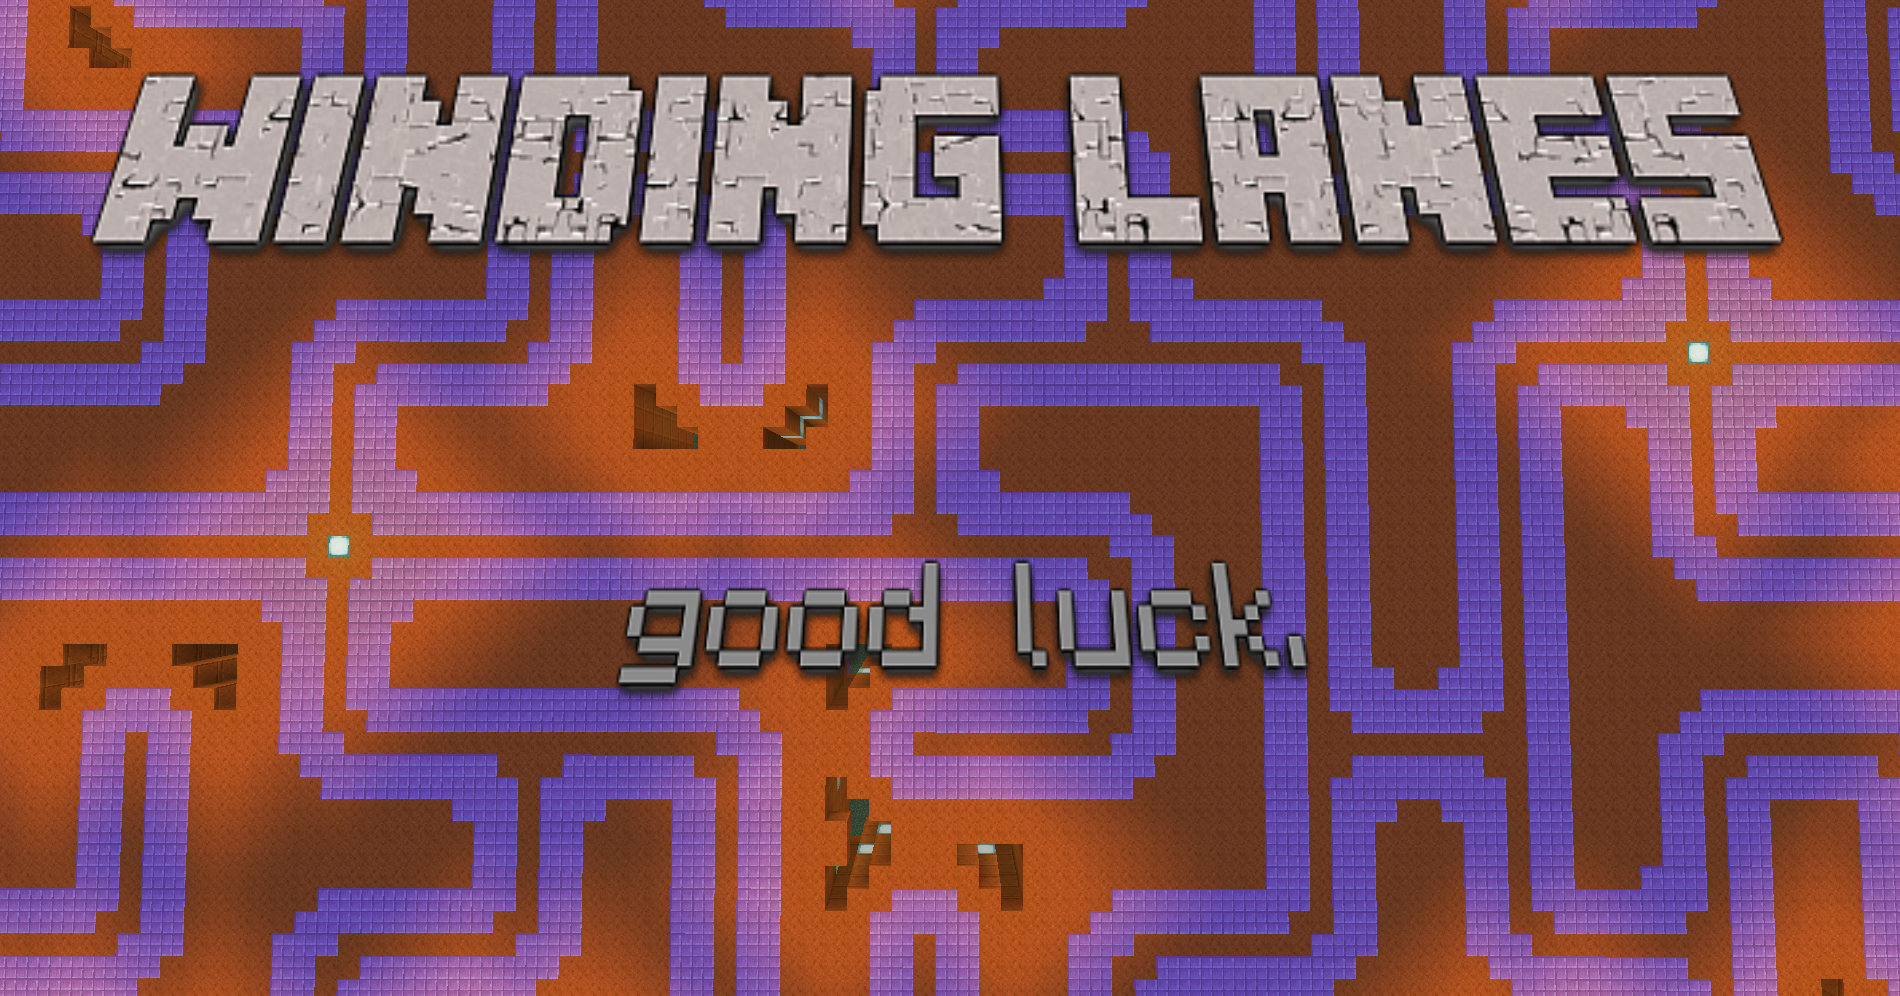 Download Winding Lanes for Minecraft 1.16.5